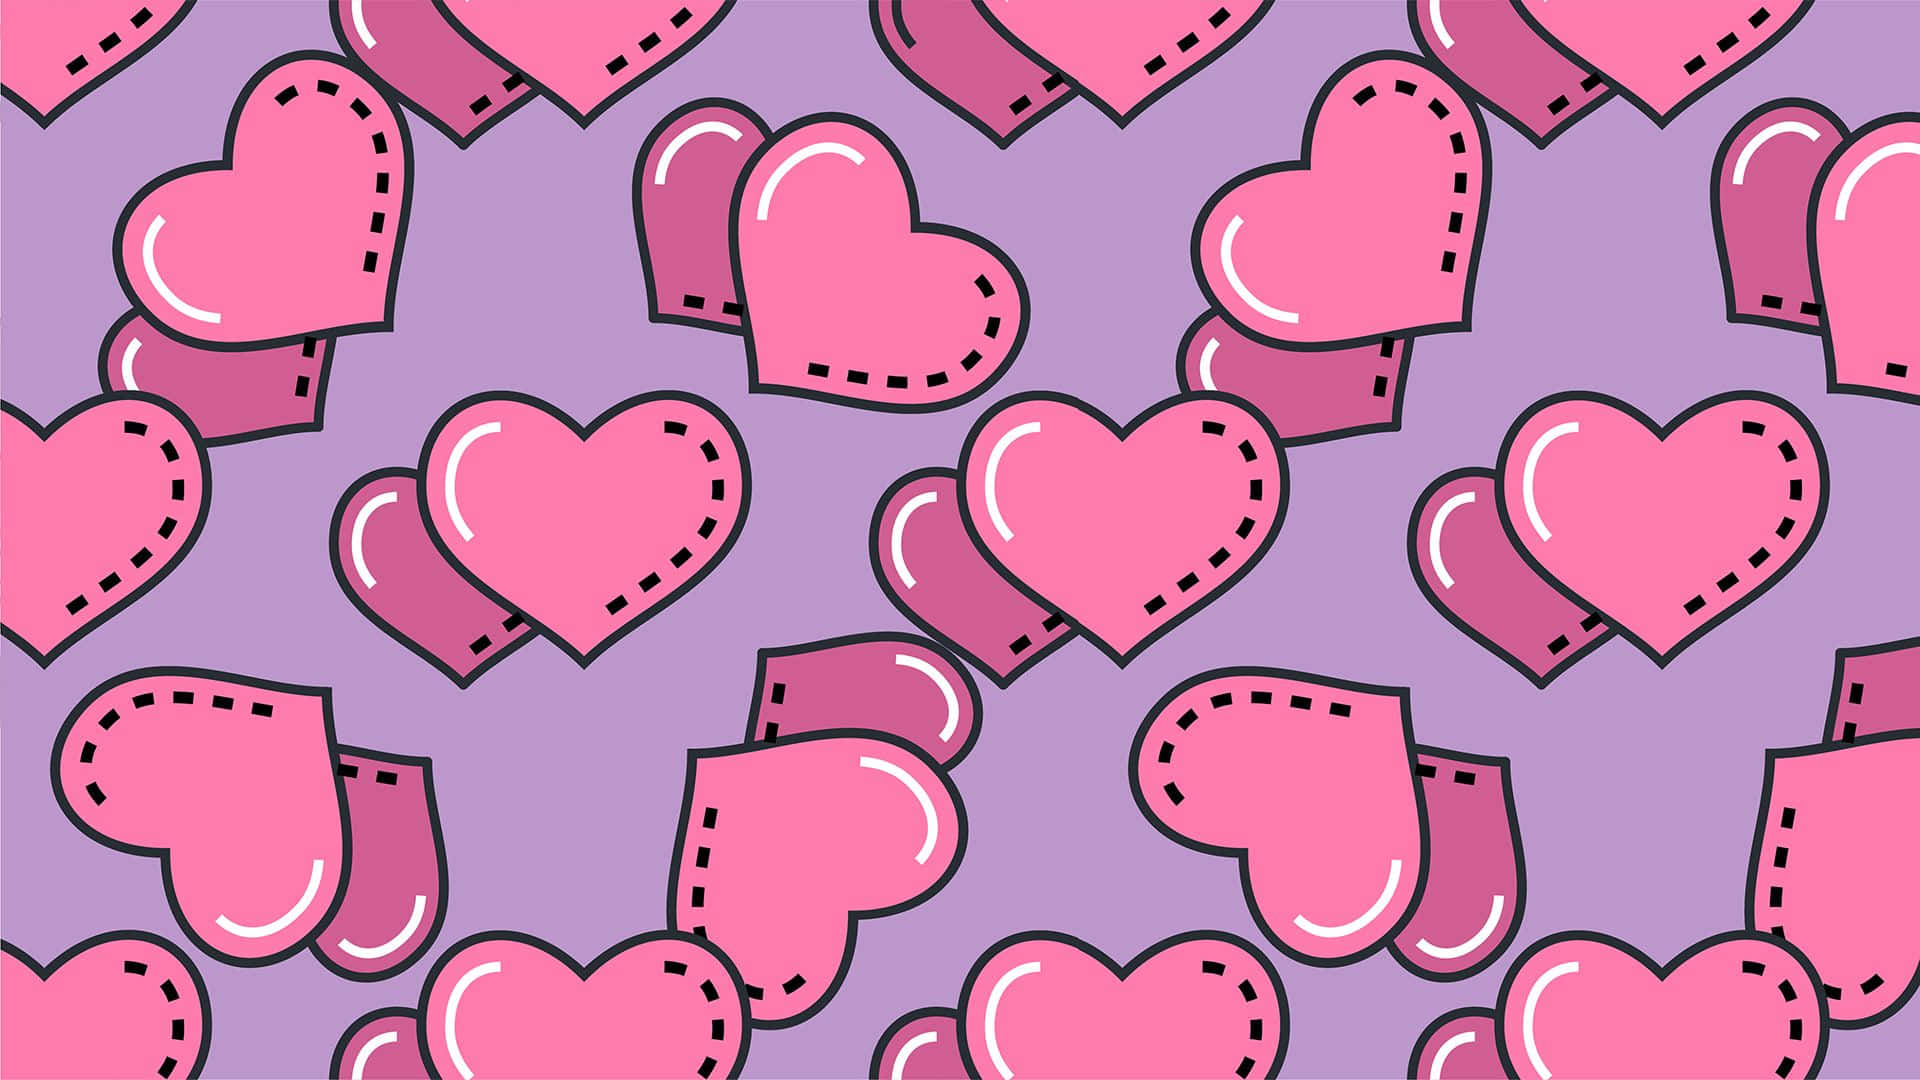 Whimsical Cartoon Heart in Vibrant Pink and Purple Tones Wallpaper